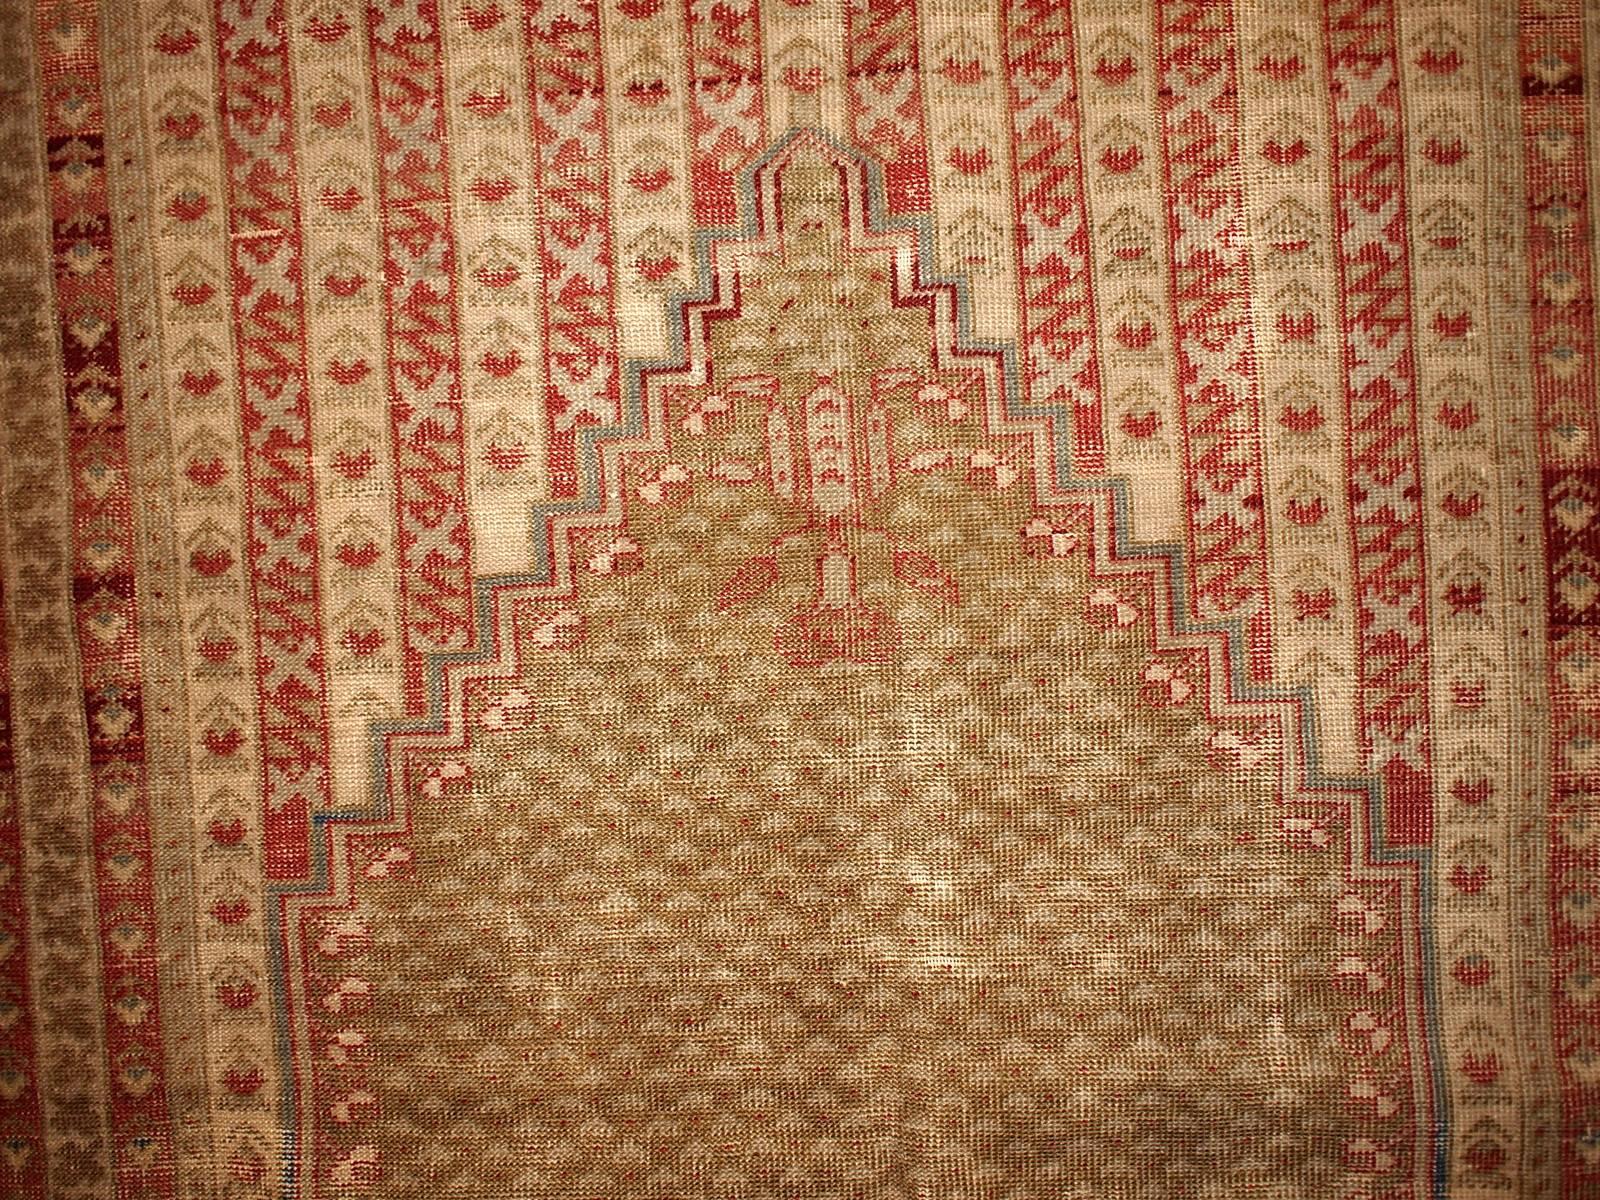 Antique collectible prayer Turkish Ghurdes rug. The rug is damaged by age and condition is not perfect, but still the pattern and colors are gorgeous on it. The rug is in olive green color and lots of little borders in burgundy, red and beige shades